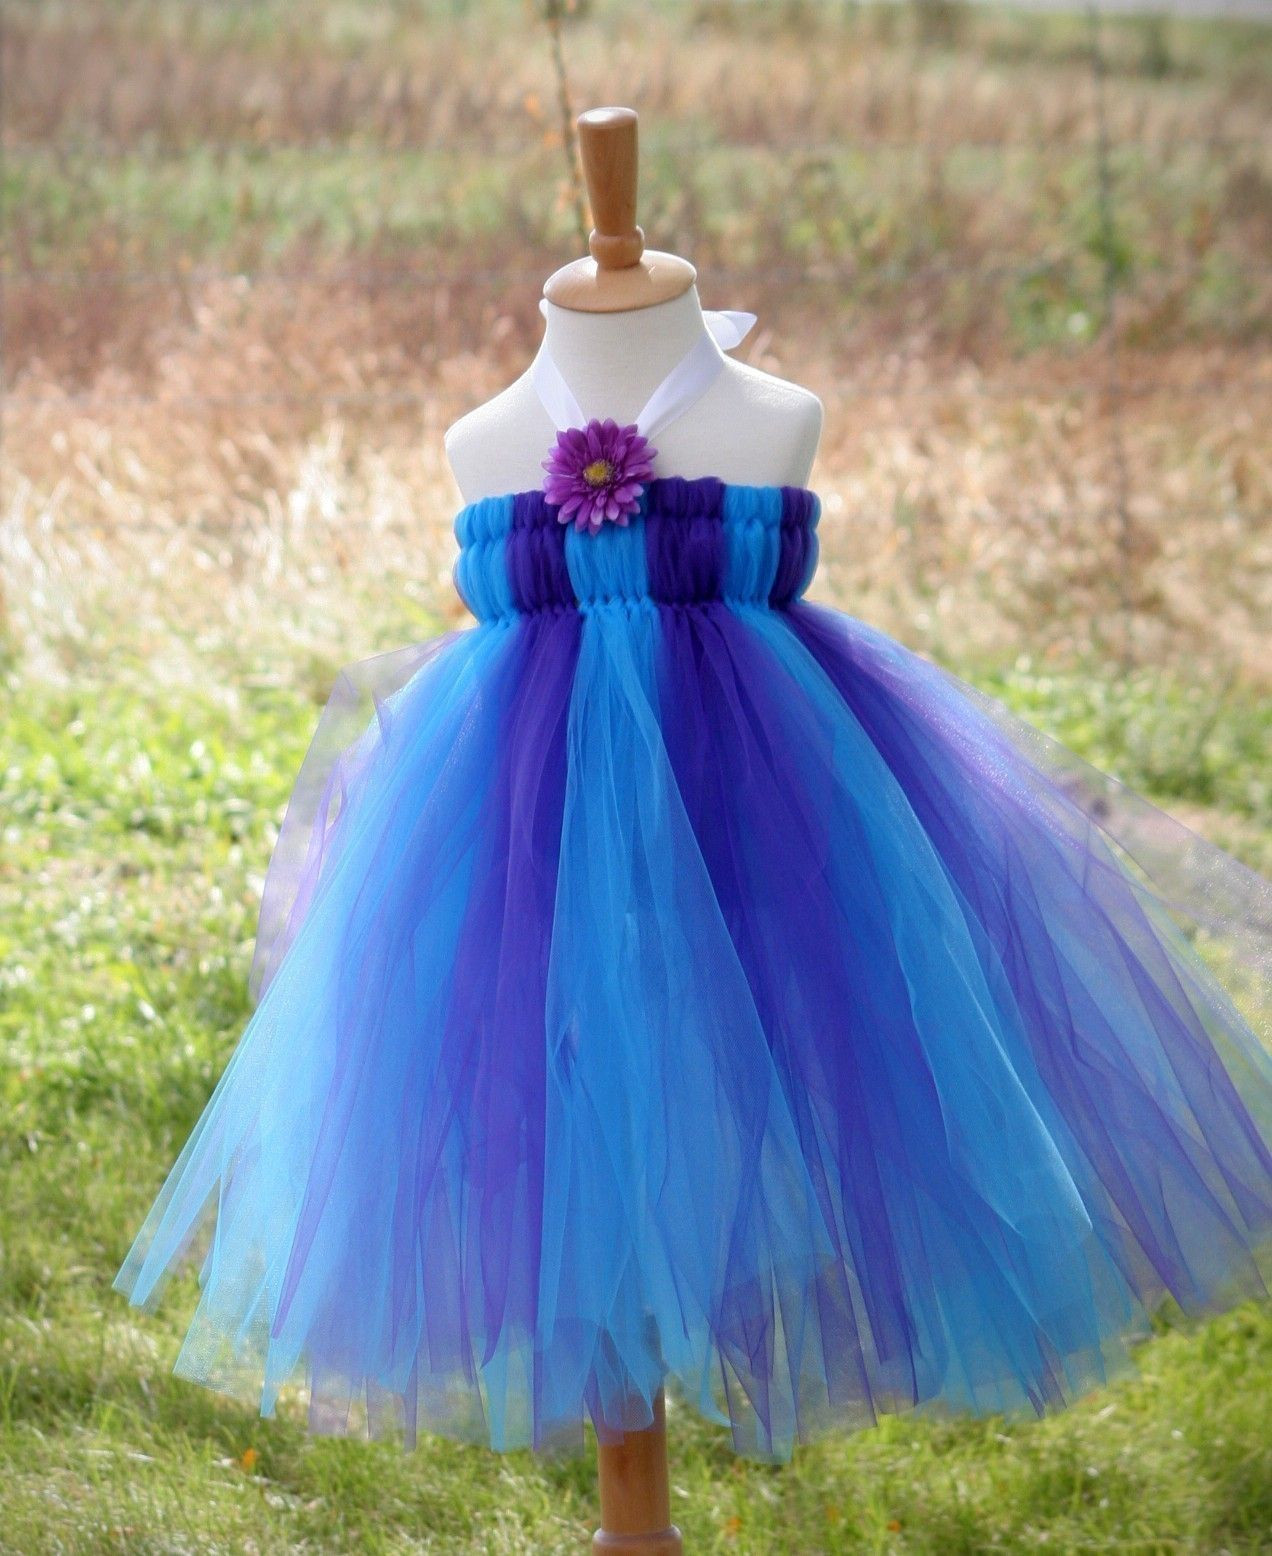 Tulle Dress Toddler DIY
 How to Make a Tulle Dress for a Little Girl I made this